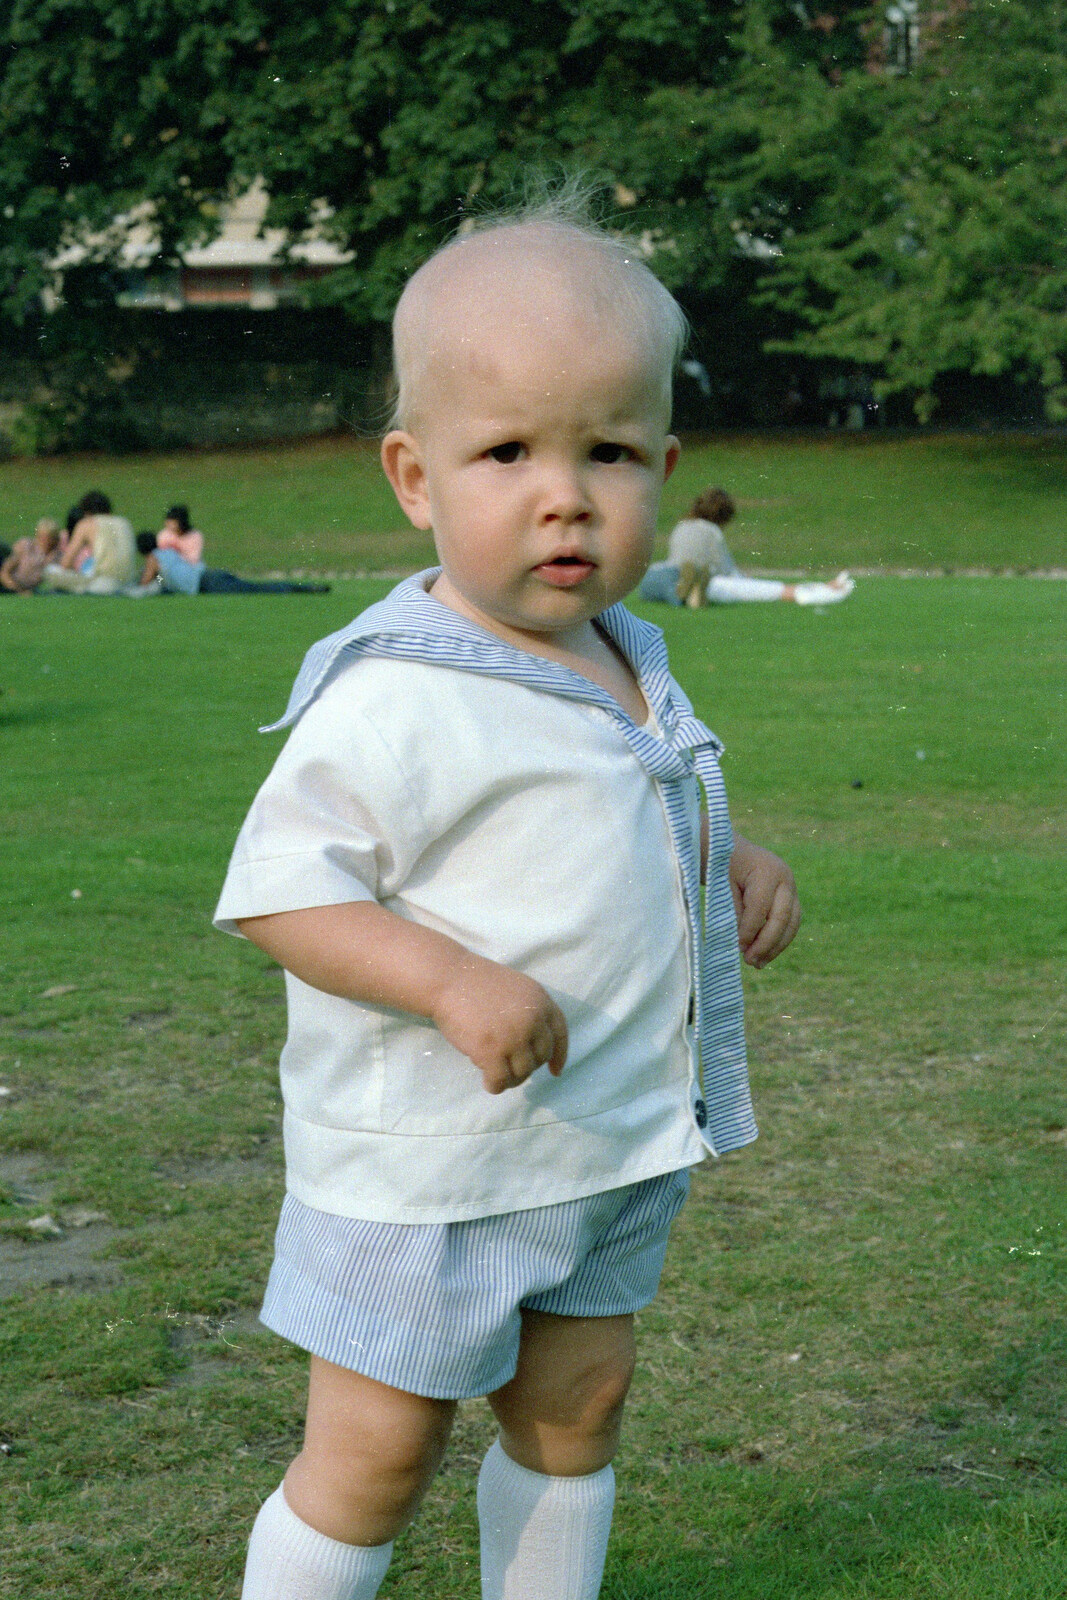 A sailor-suited sprog roams around in the park from The Last Day of Term, and Leaving New Milton, Hampshire - 18th September 1985